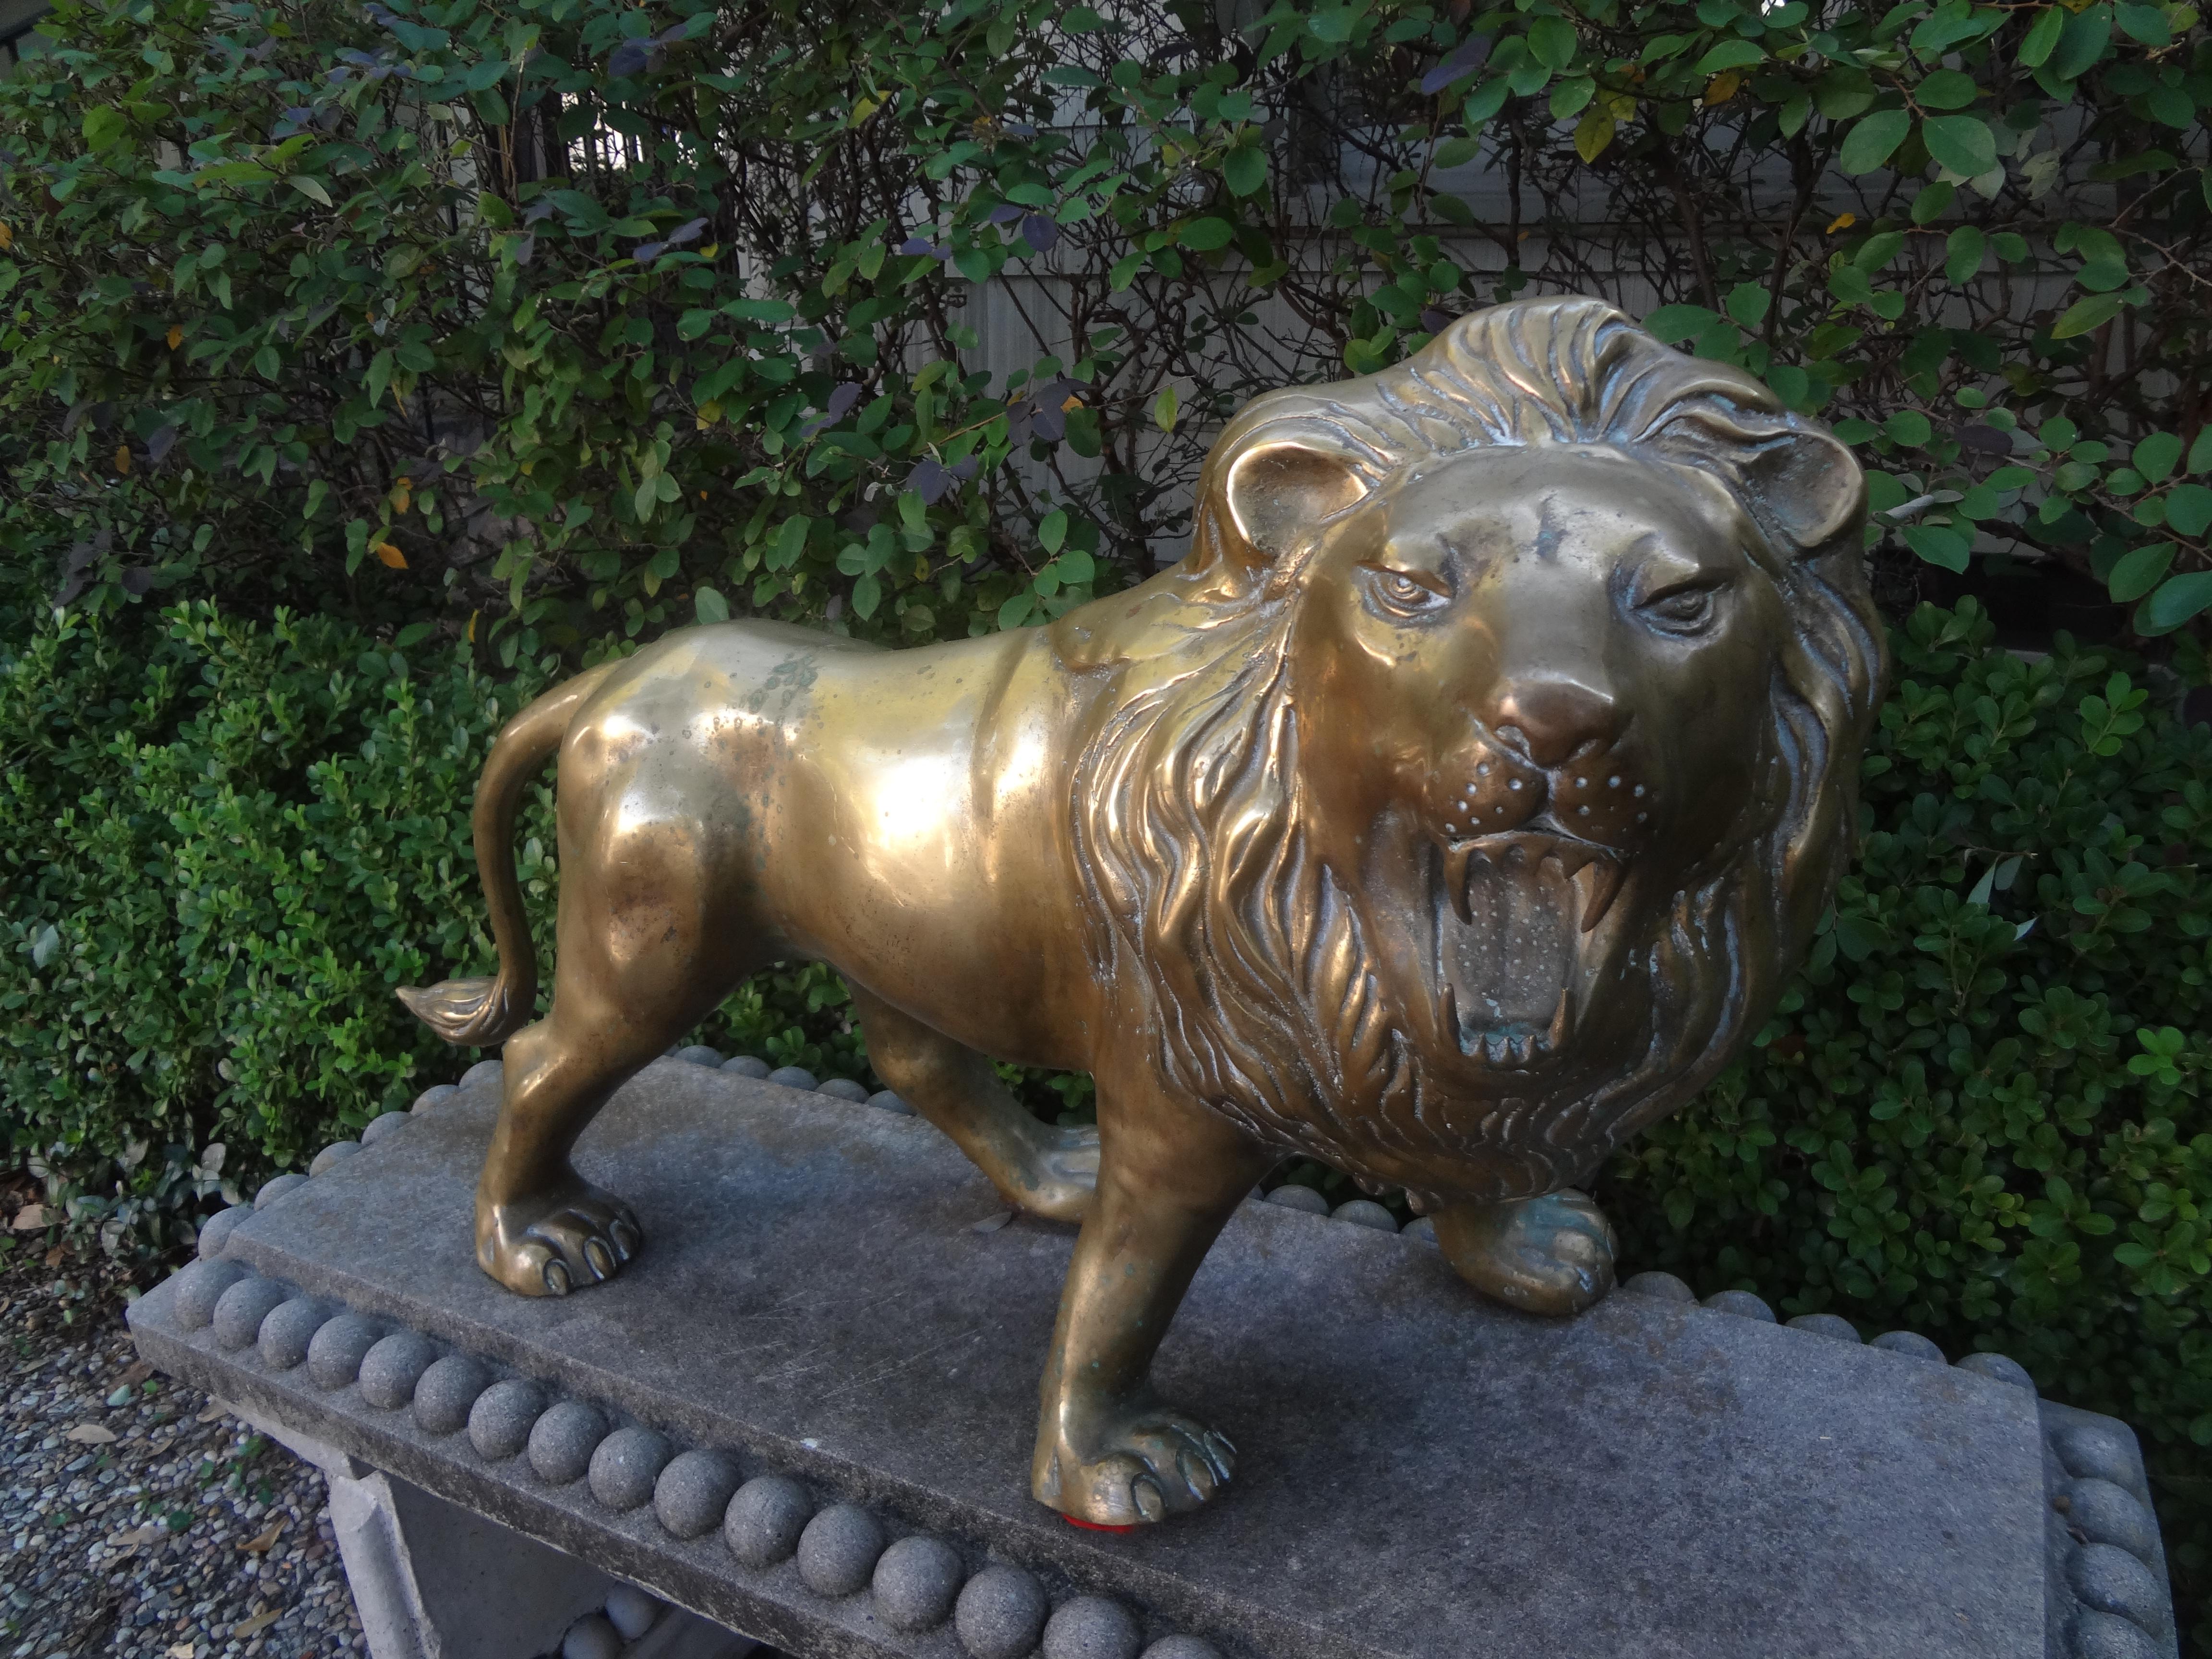 Large Hollywood Regency Brass Lion Sculpture.
We offer a friendly Hollywood Regency brass lion statue or sculpture. Beautifully detailed and ready to add a touch of whimsy to your interior.